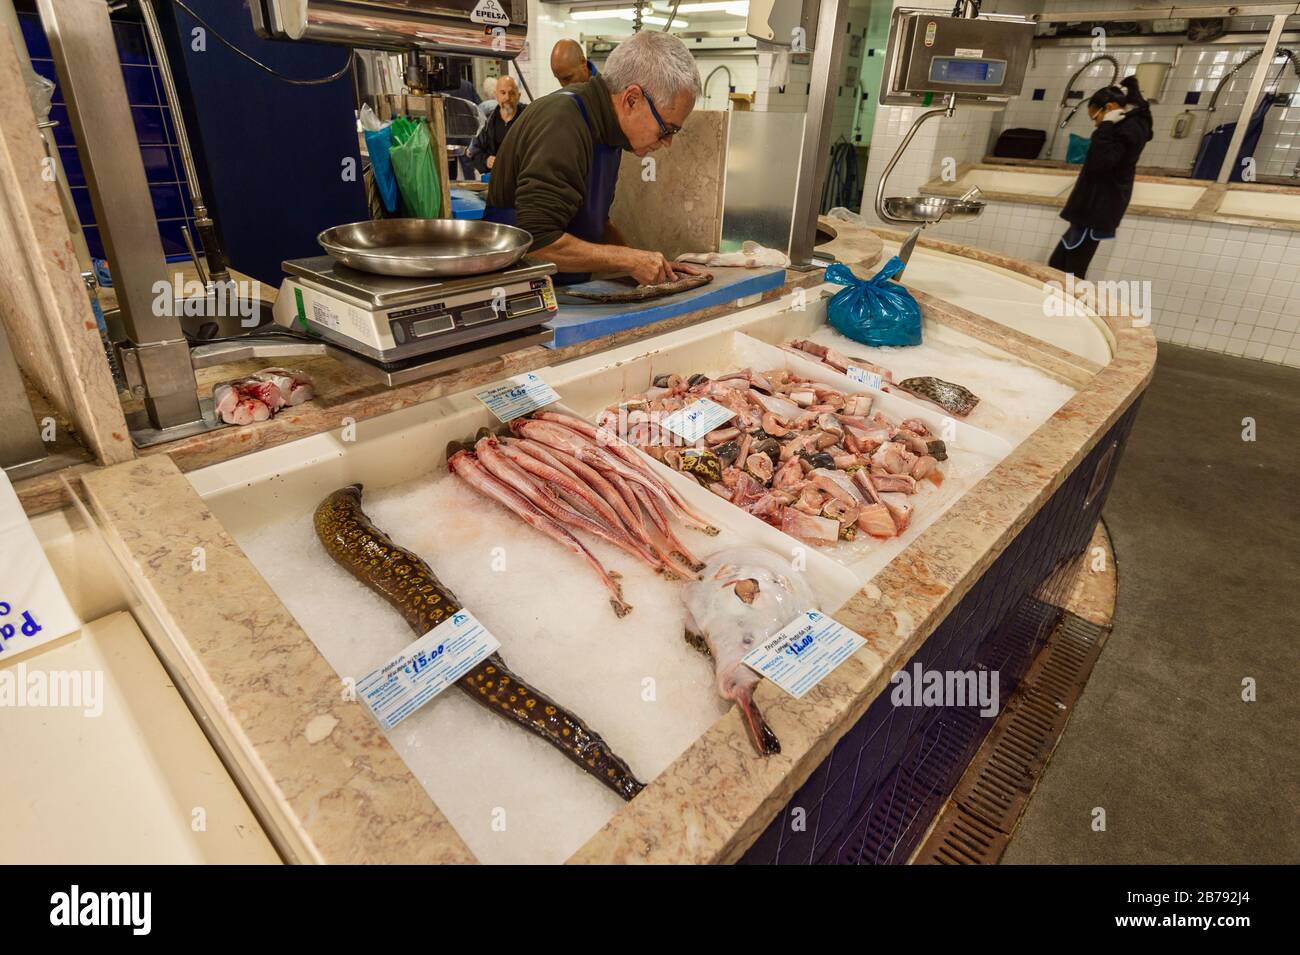 Lagos, Portugal - 5 March 2020: Selling and buying fresh fish at Lagos municipal marketplace Stock Photo